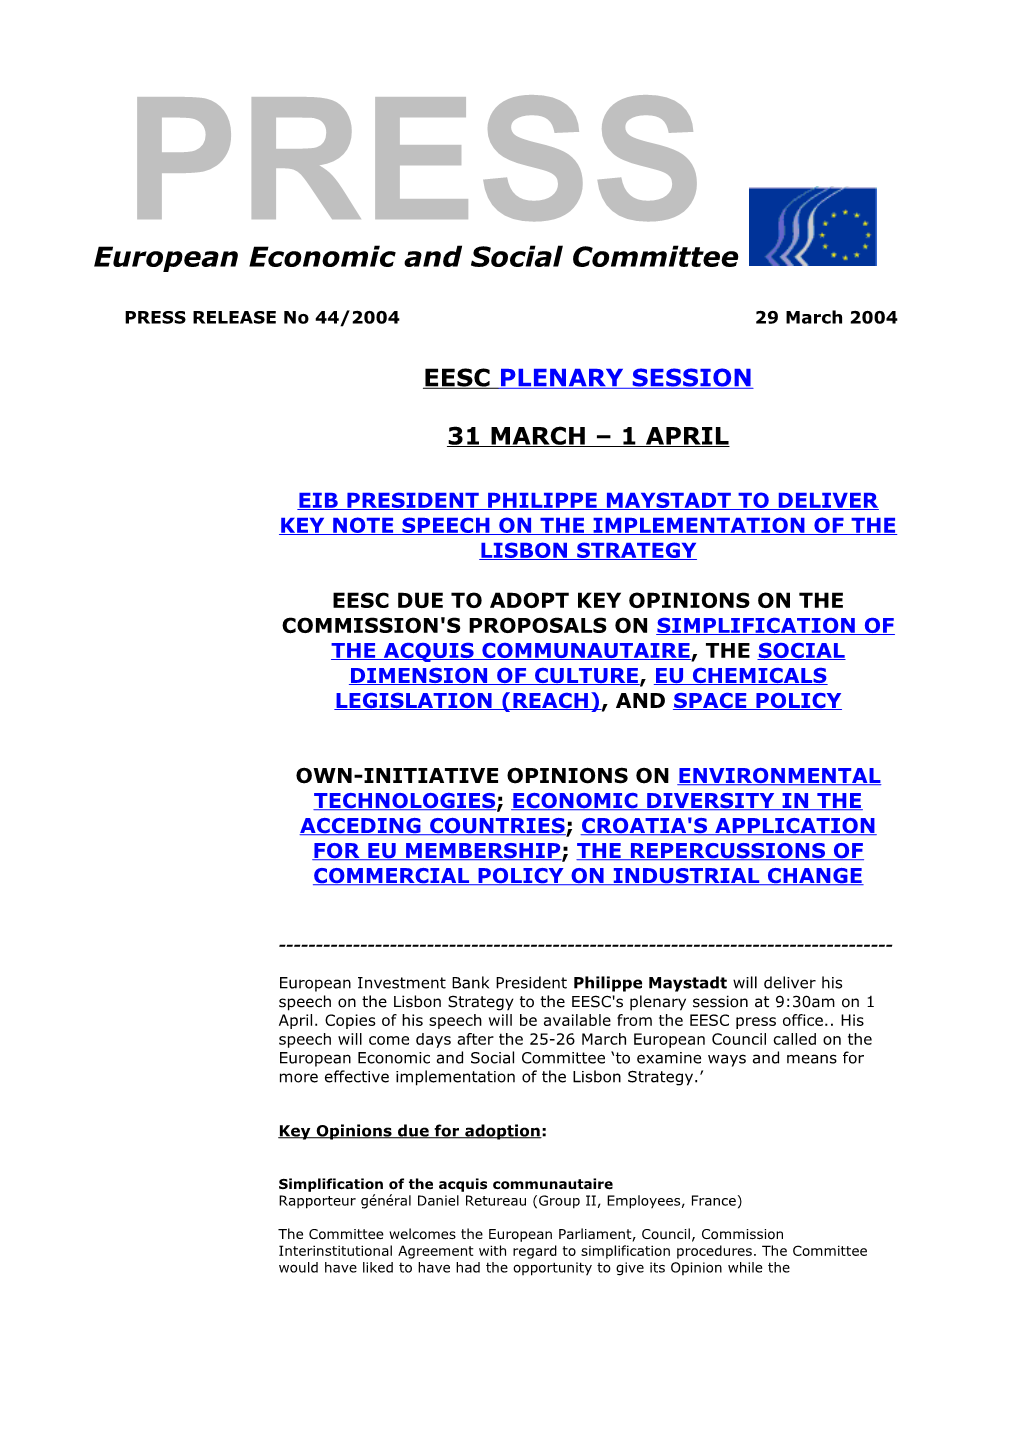 Eib President Philippe Maystadt to Deliver Key Note Speech on the Implementation of The